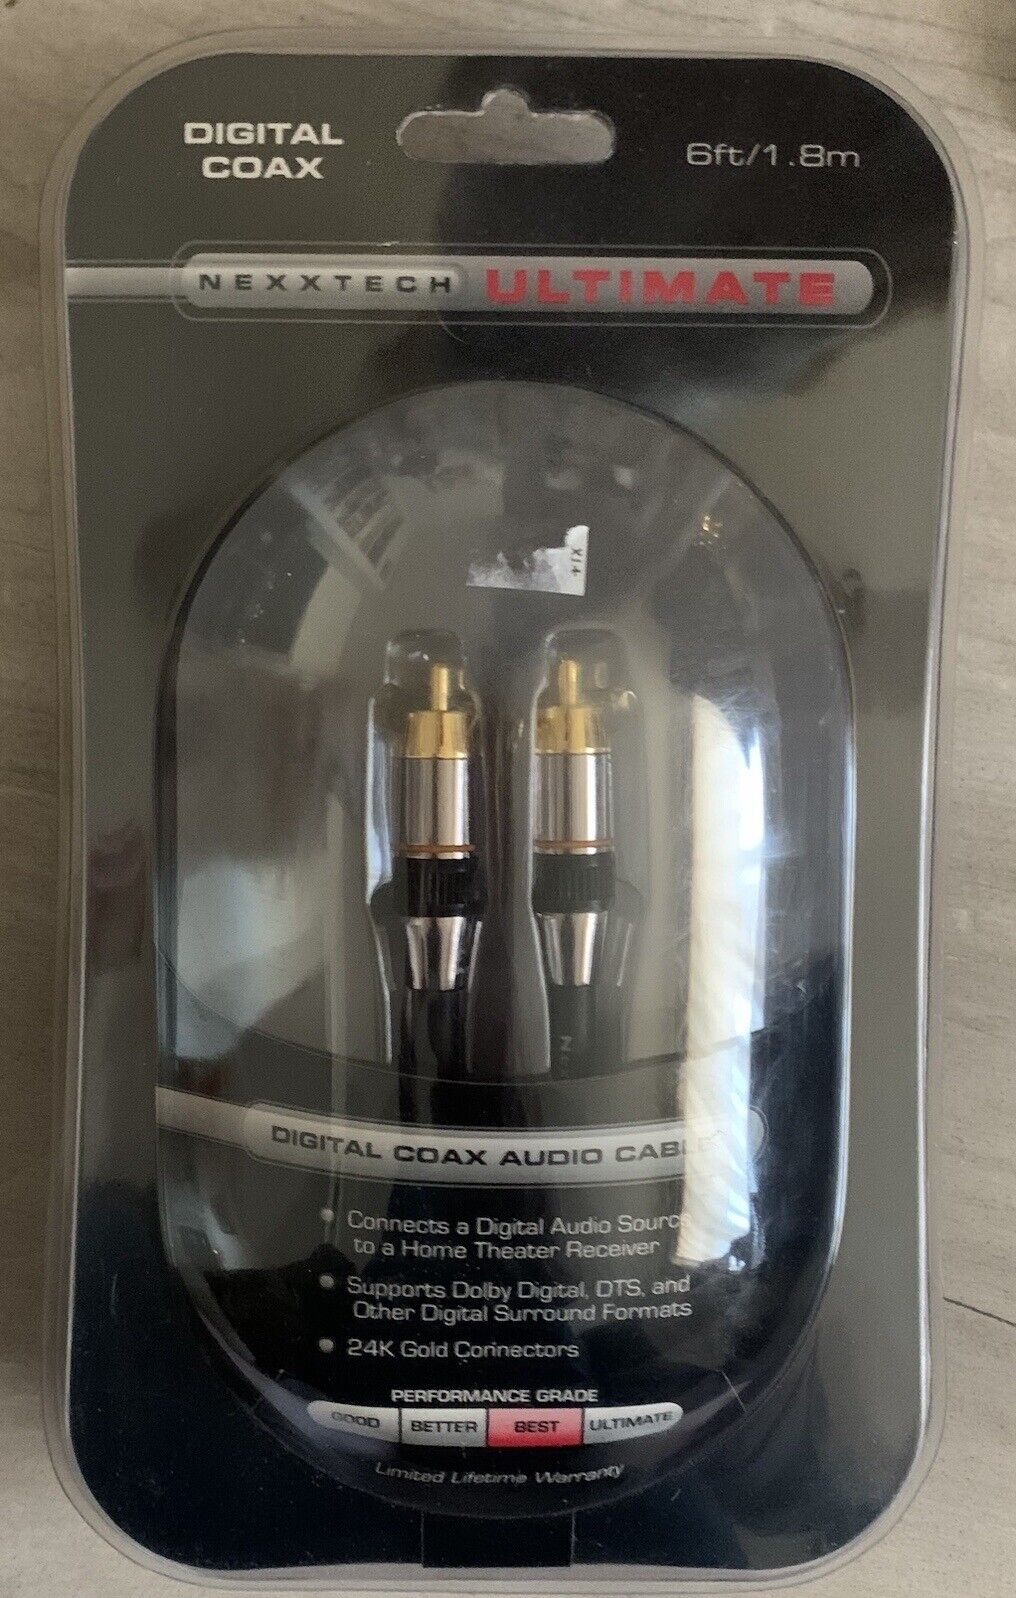 NEXXTECH Ultimate DIGITAL COAXIAL AUDIO CABLE 6ft / 1.8m New In Package